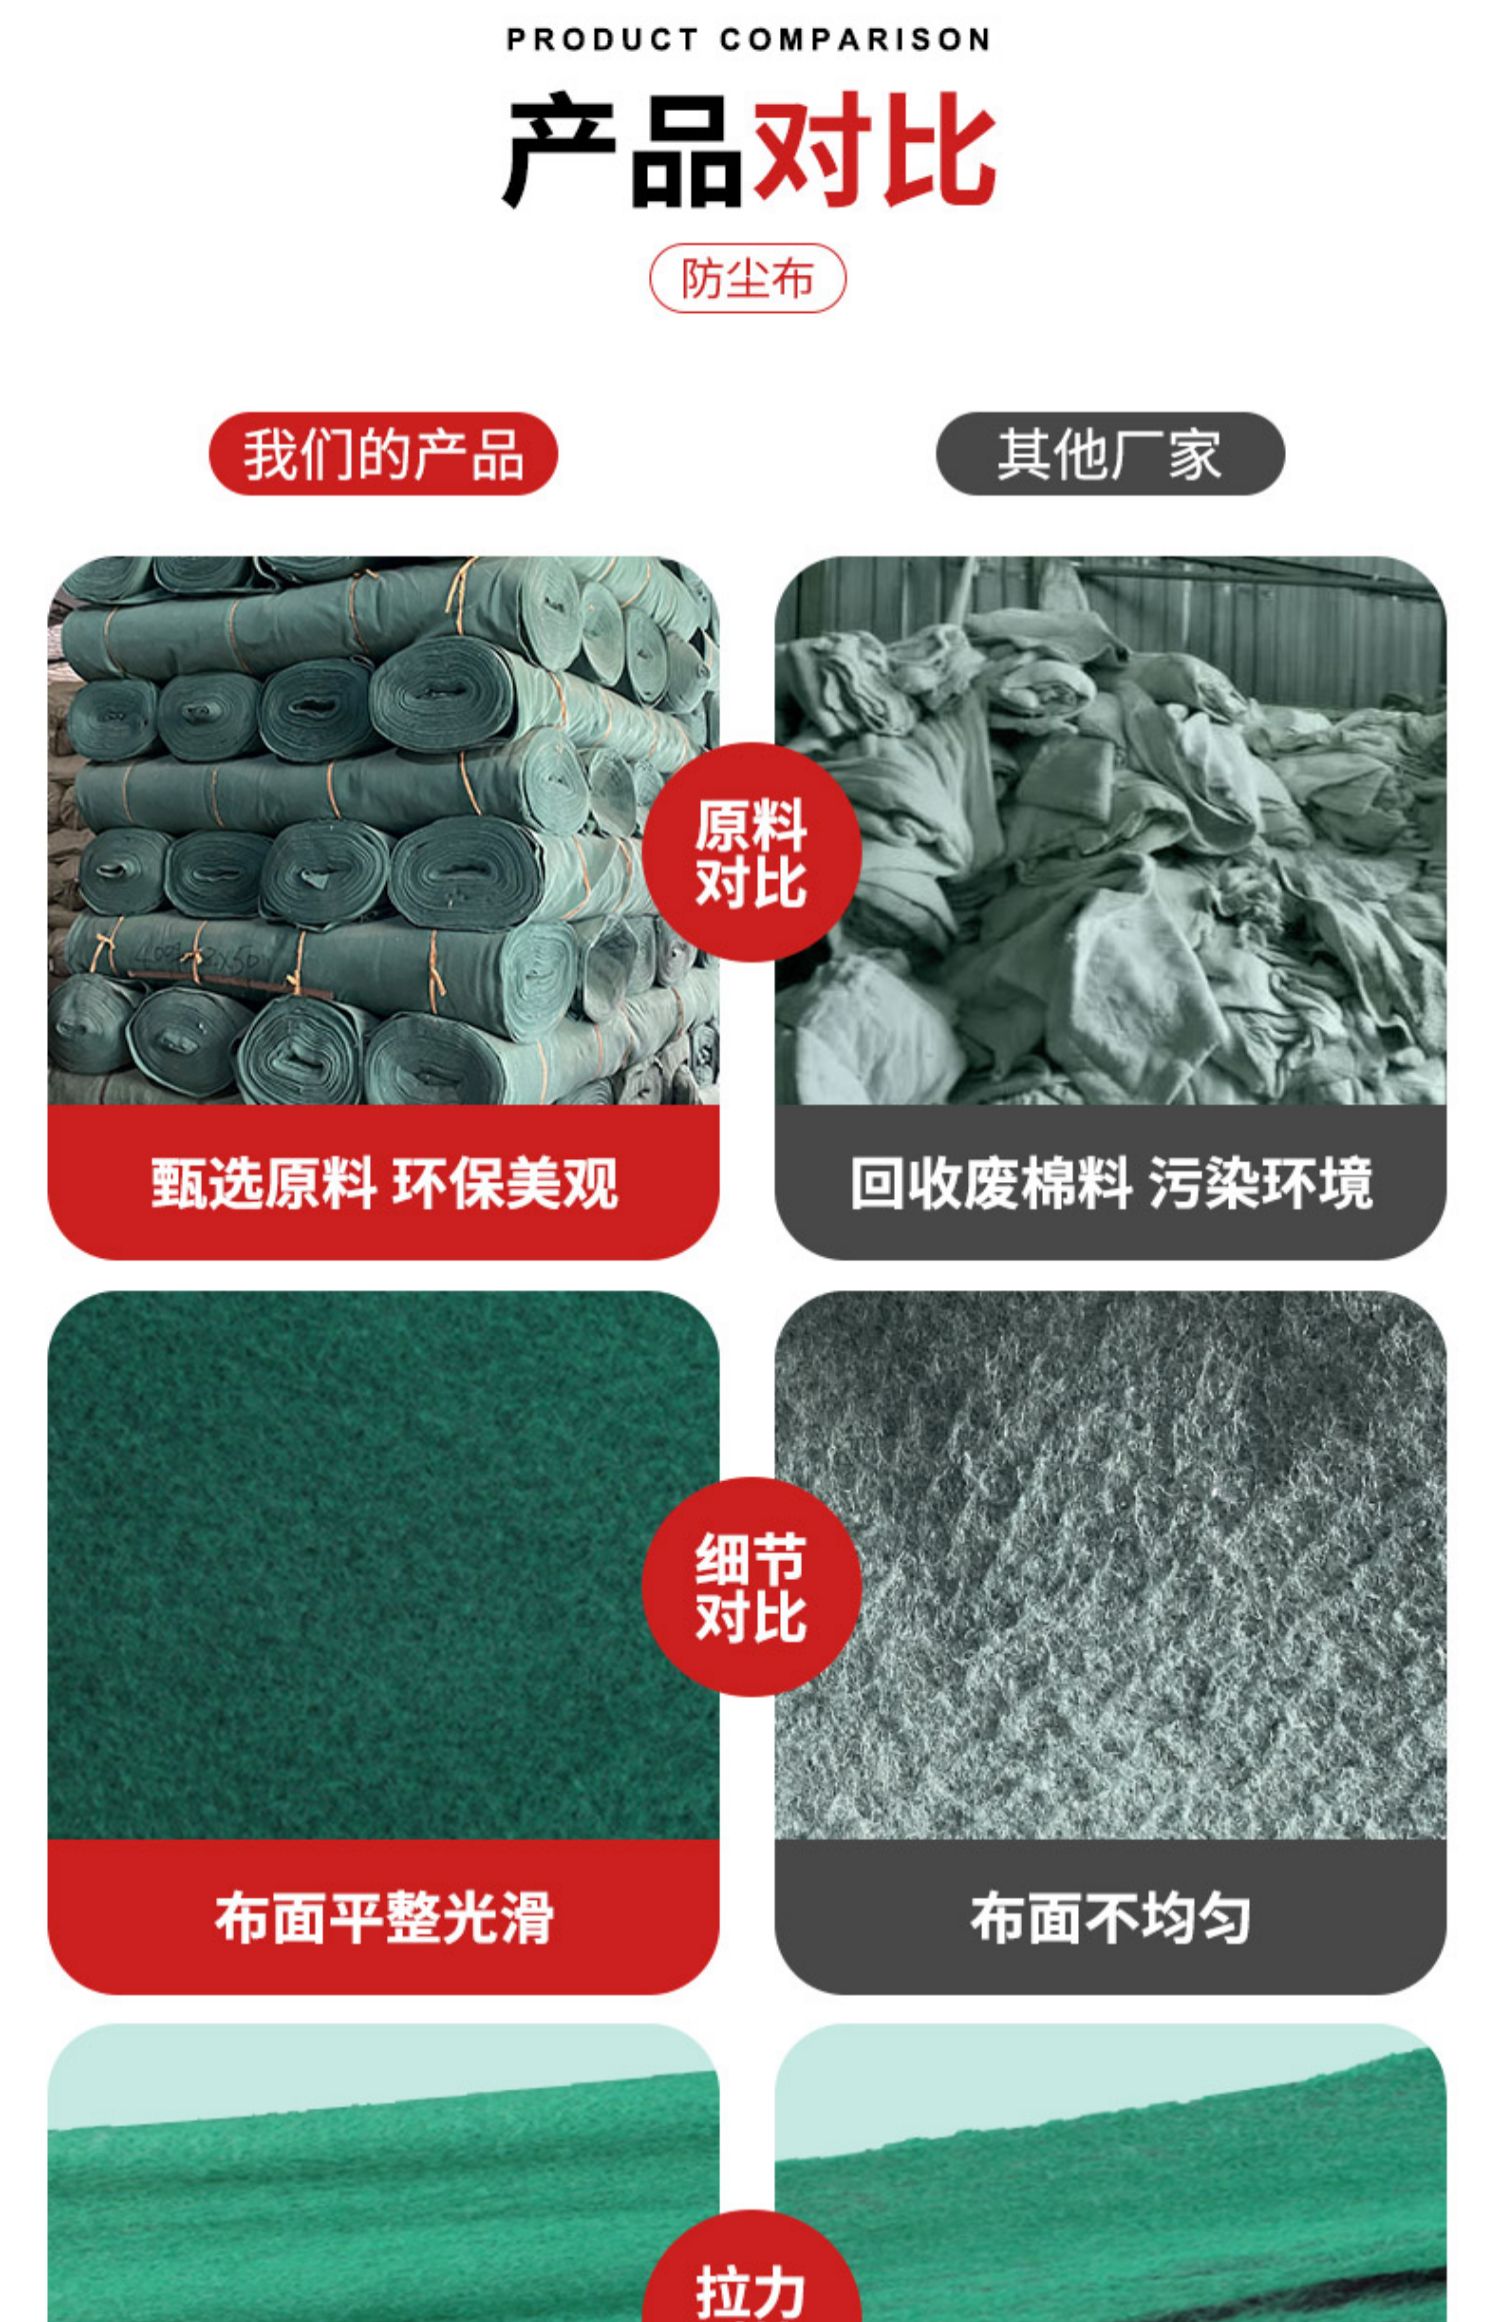 Green geotextile construction site dustproof cover, soil cold proof greenhouse, insulation, road moisturizing maintenance, garden greening, non-woven fabric